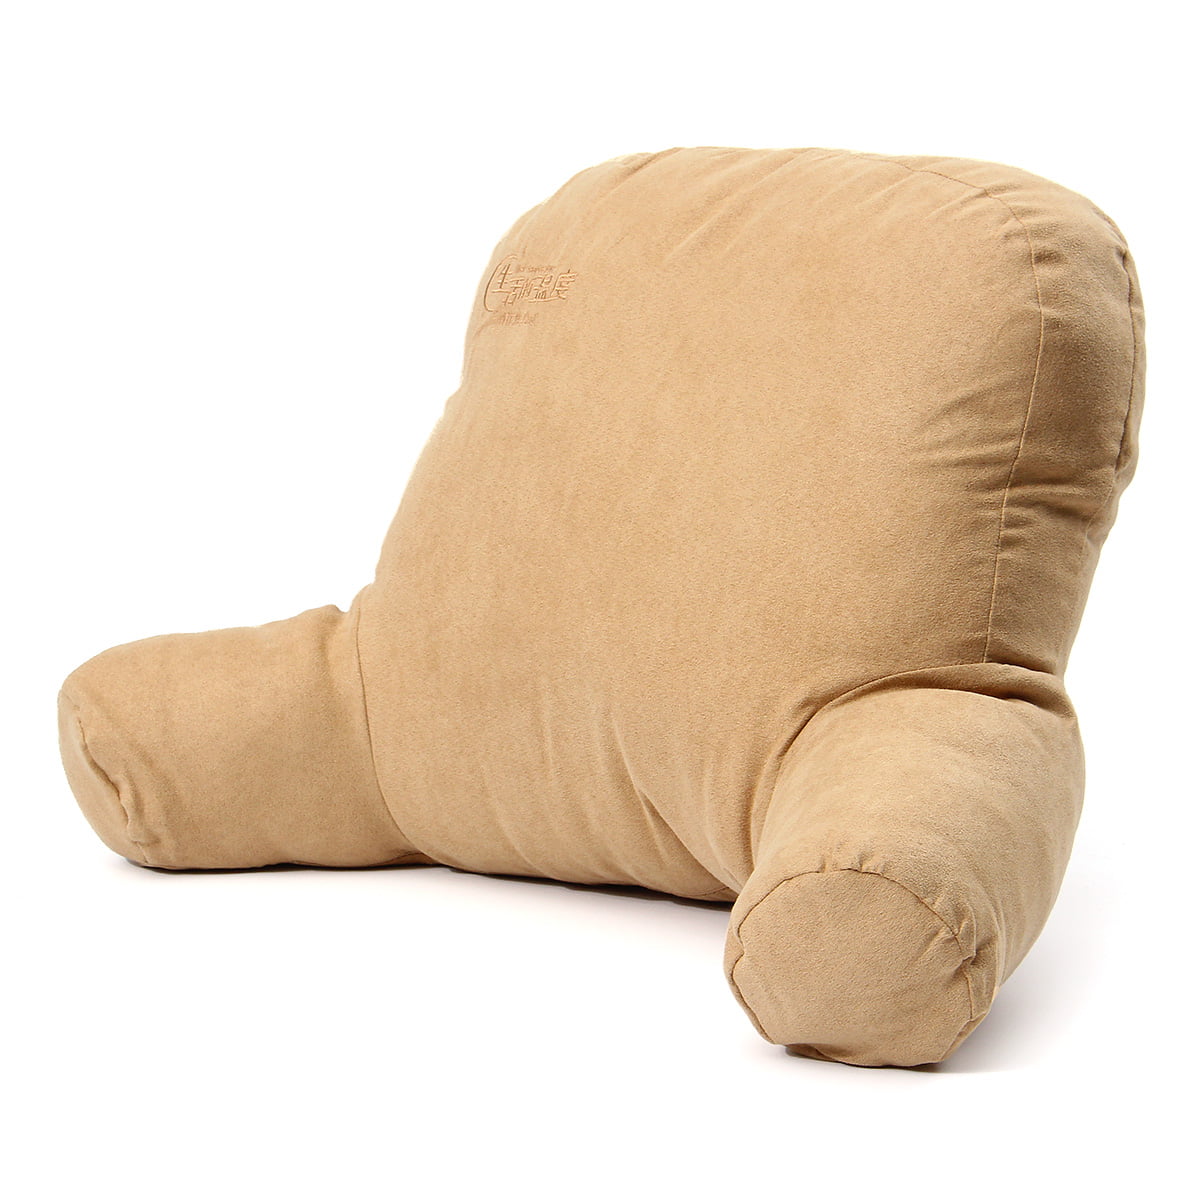 seat pillow for bed